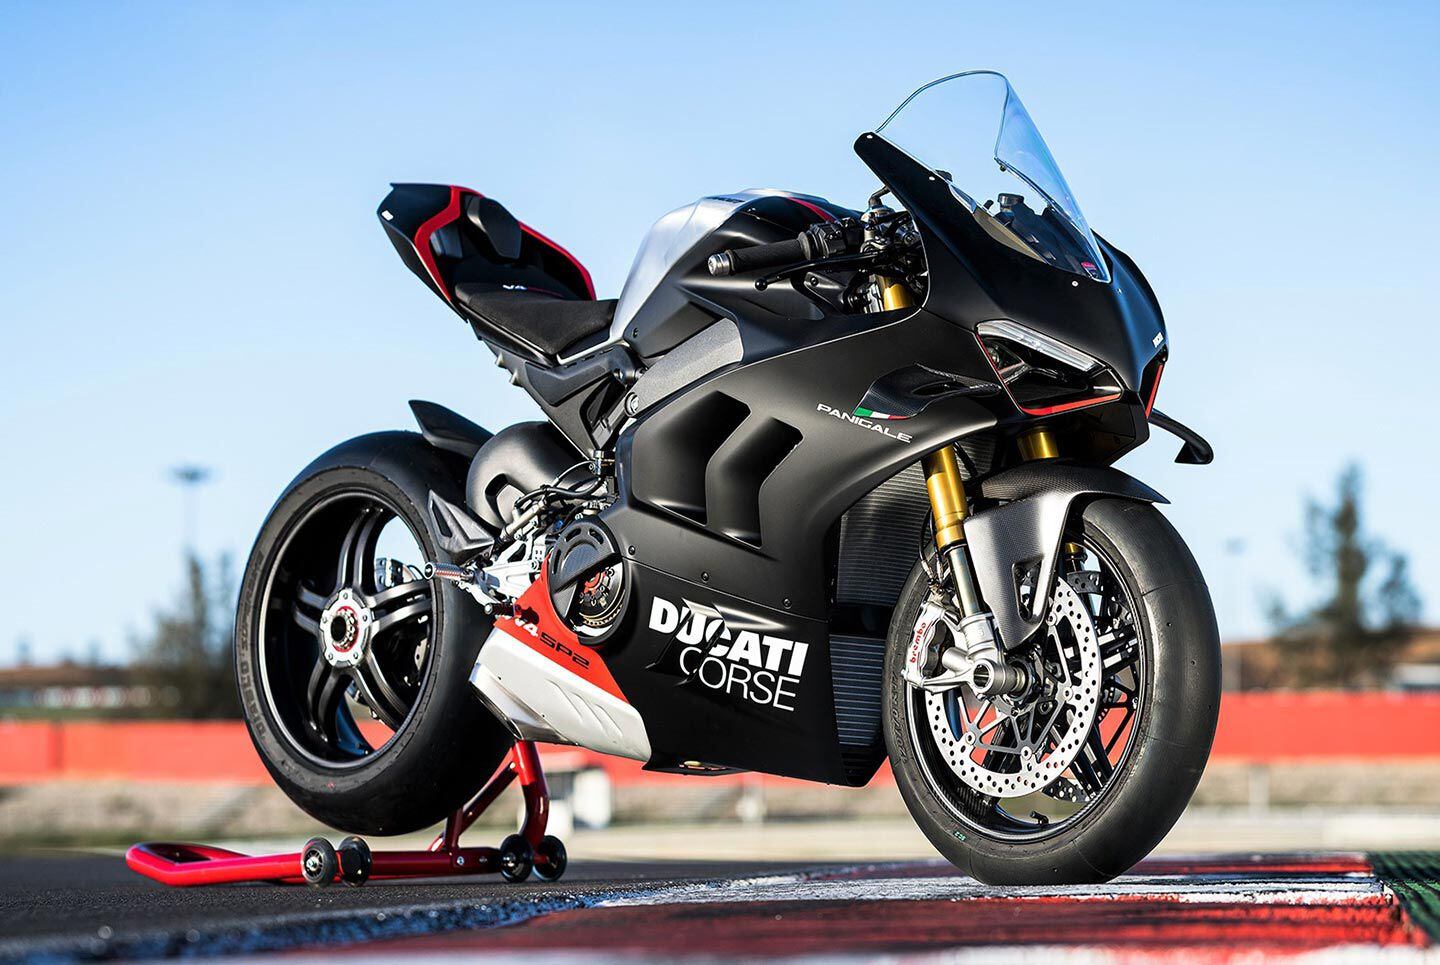 The track-biased Panigale V4 SP2 brings the most premium race-ready components to the table.